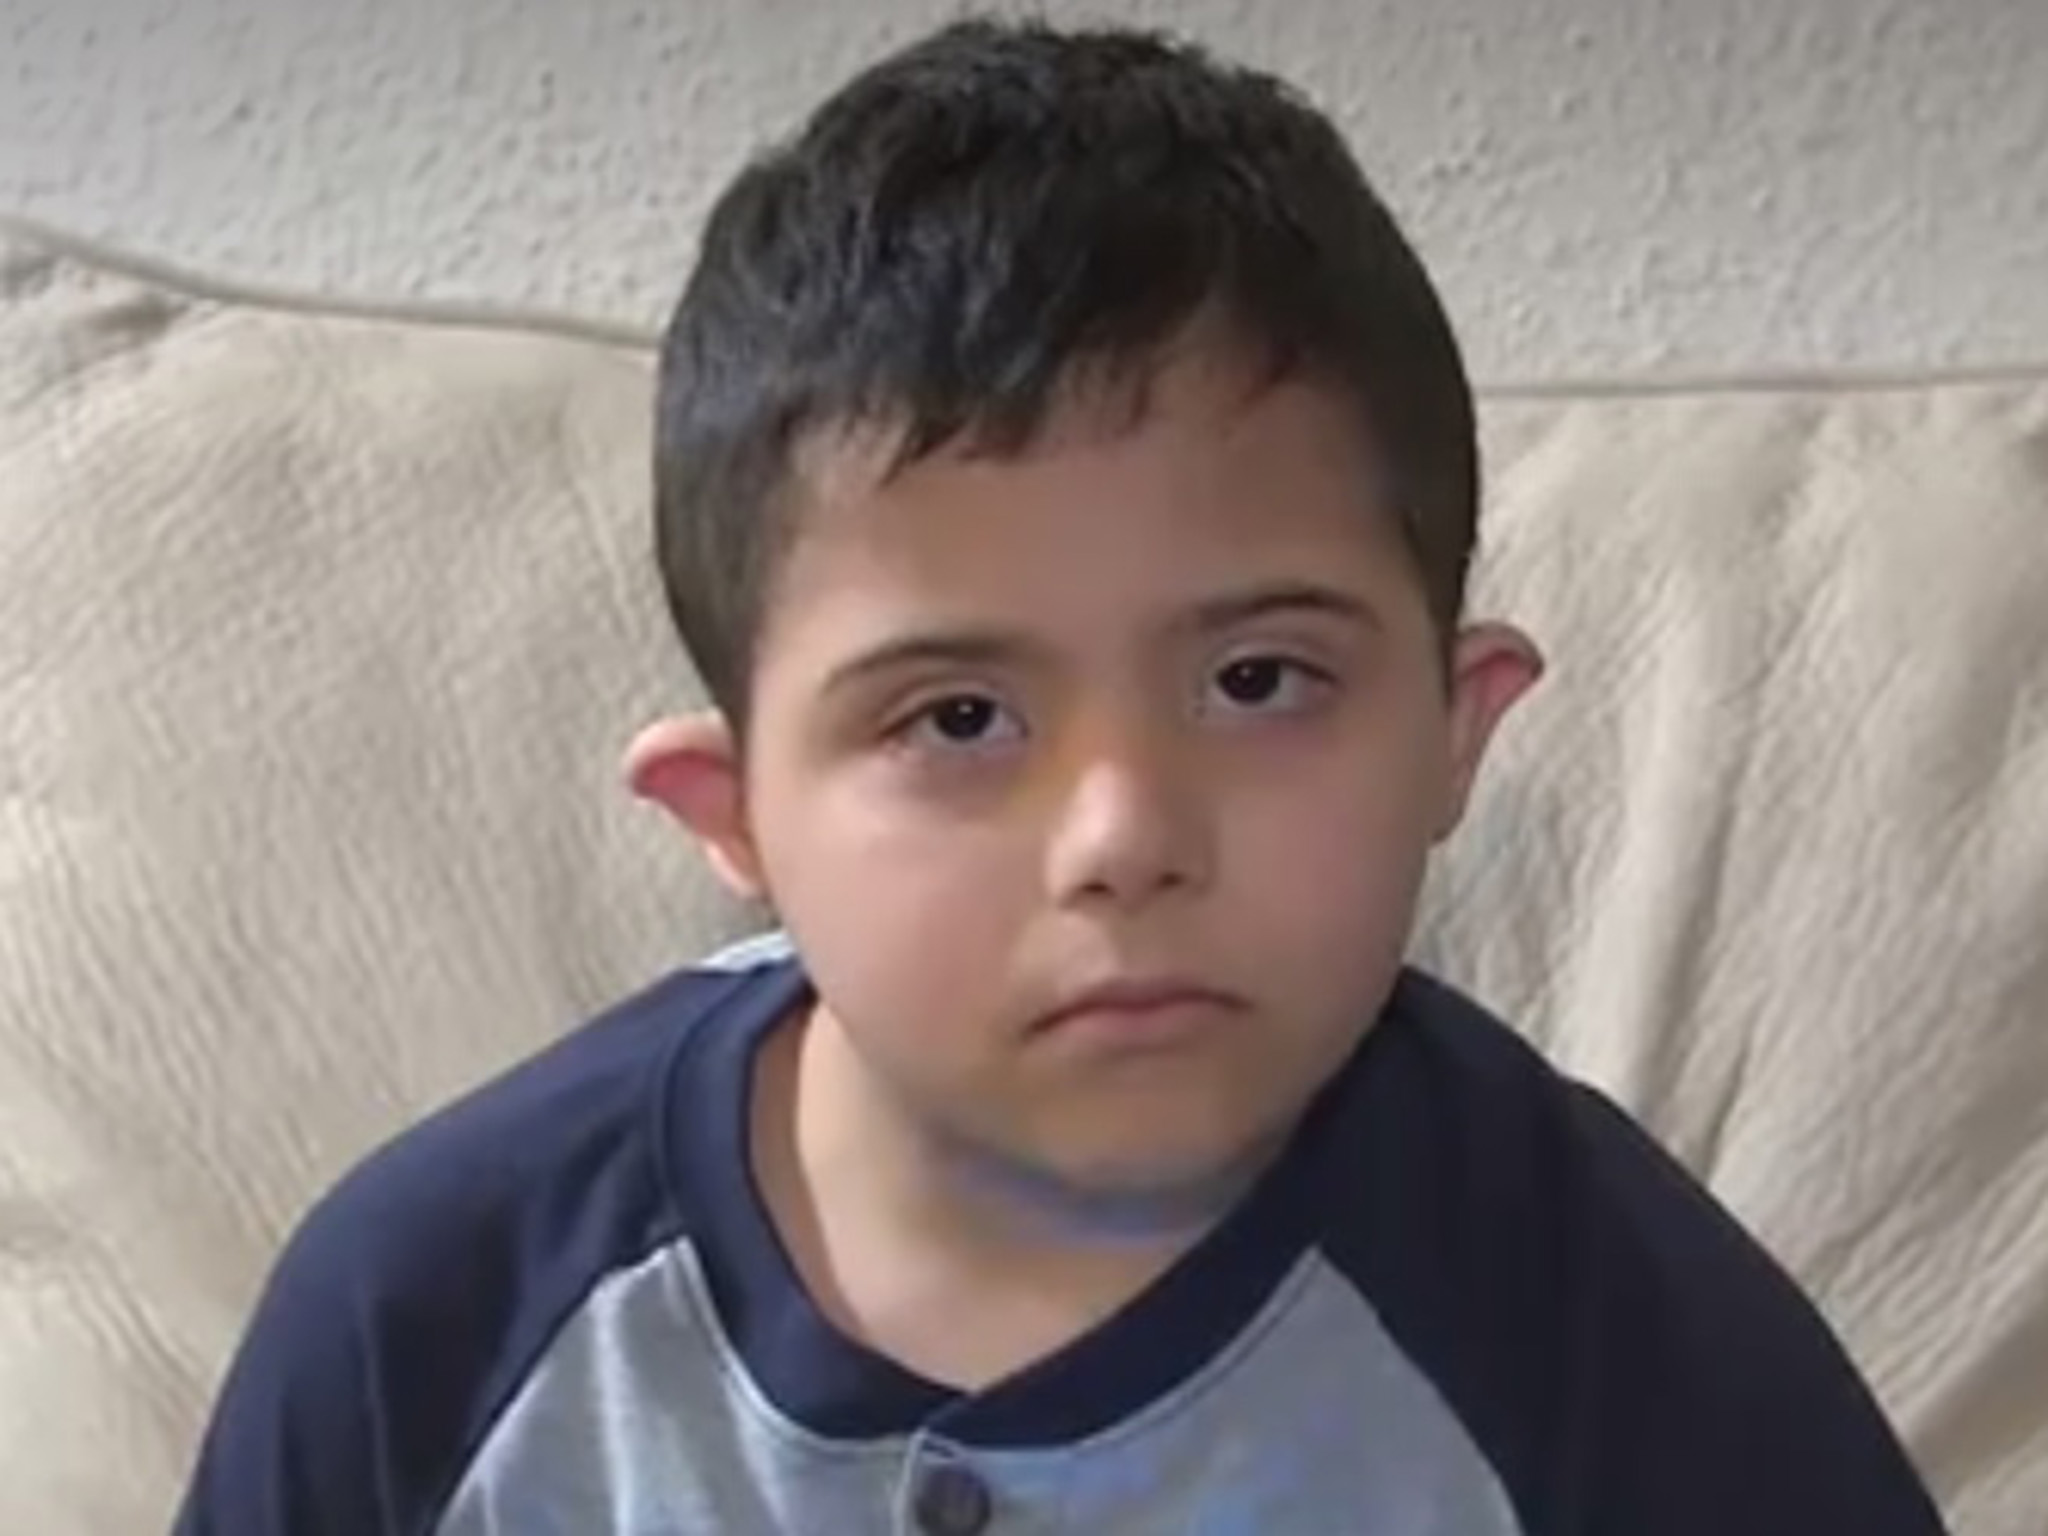 Houston: Teacher calls the cops after six-year-old Muslim child says ‘Allah’ in class